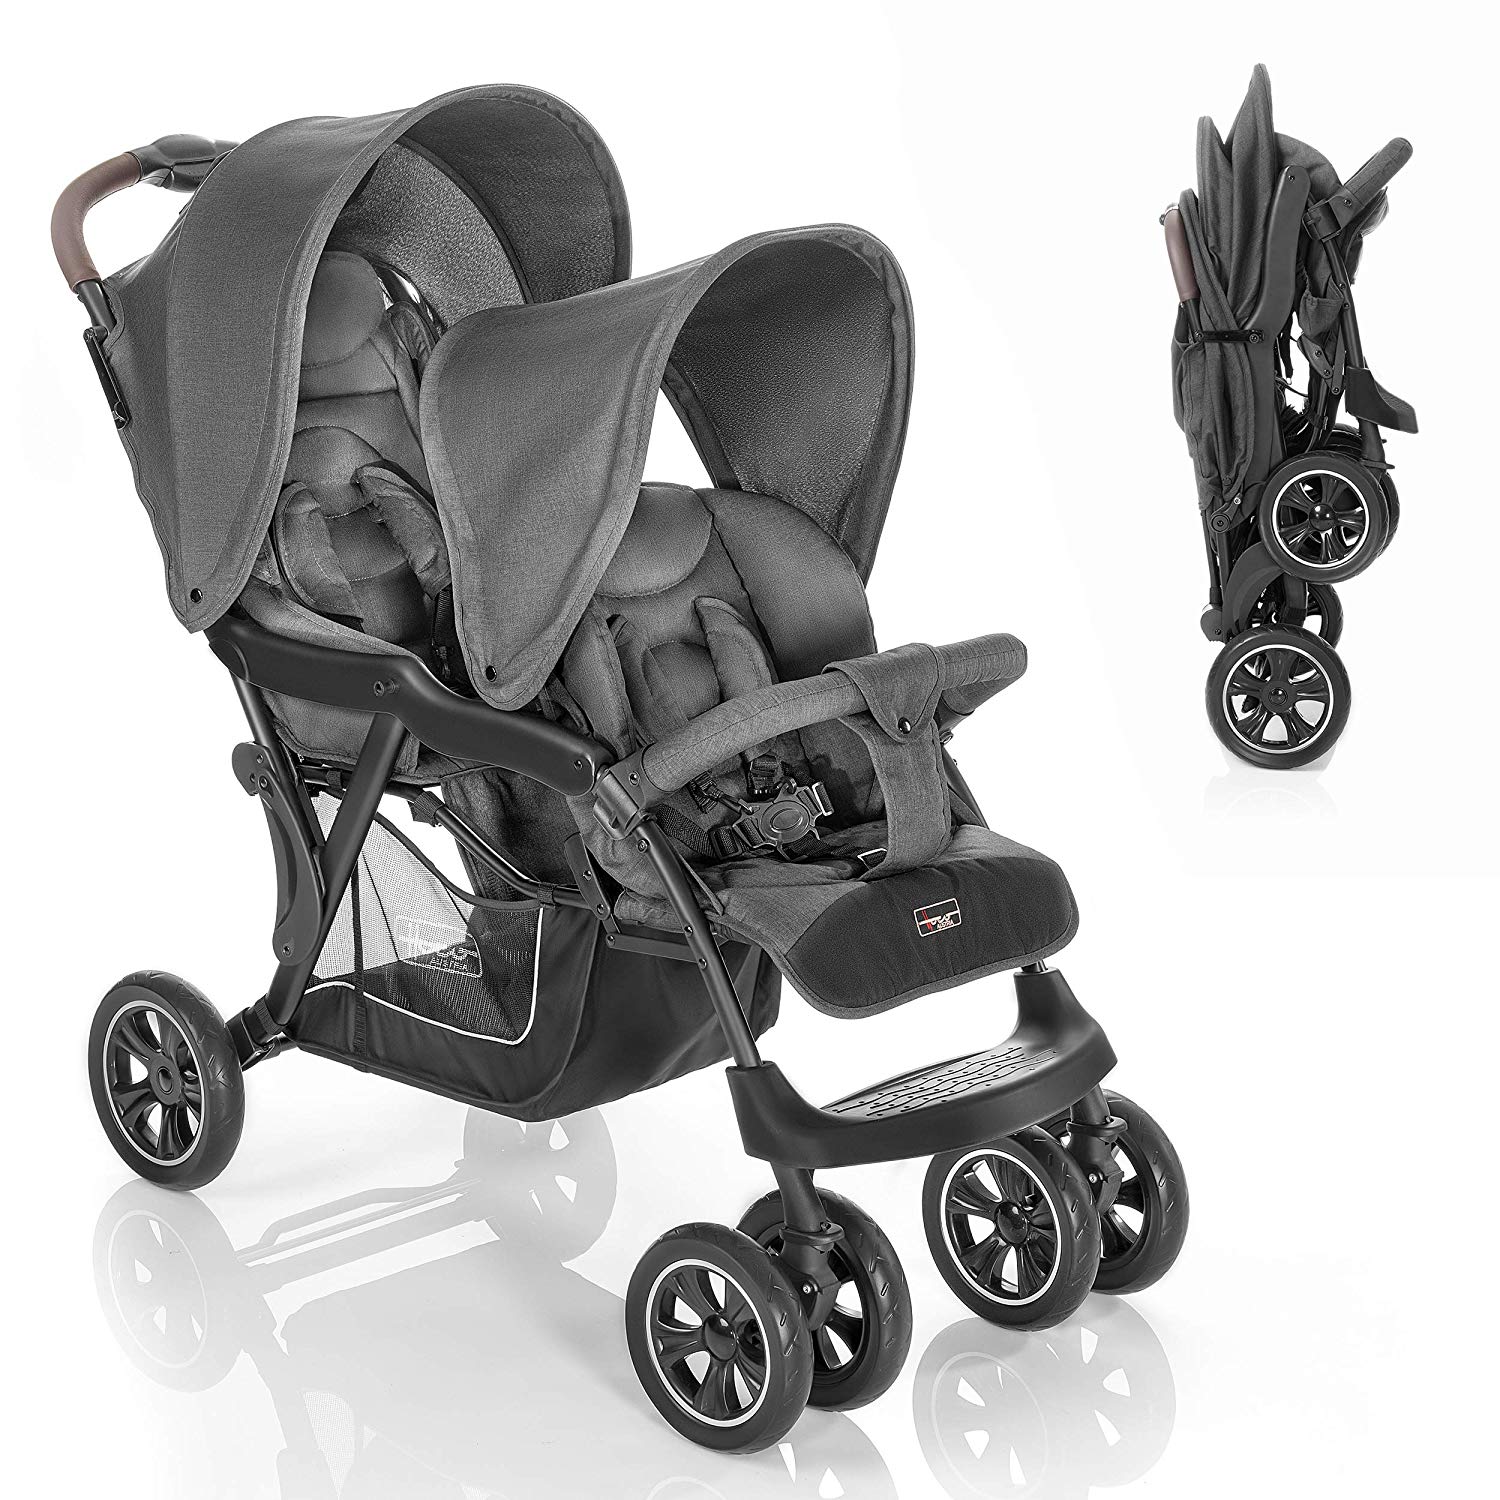 Hoco Tandem Twin Pushchair - Lightweight Buggy for 2 Children/Narrow and Agile Sibling Pushchair, Small Folding with One-Hand Folding Mechanism - Grey